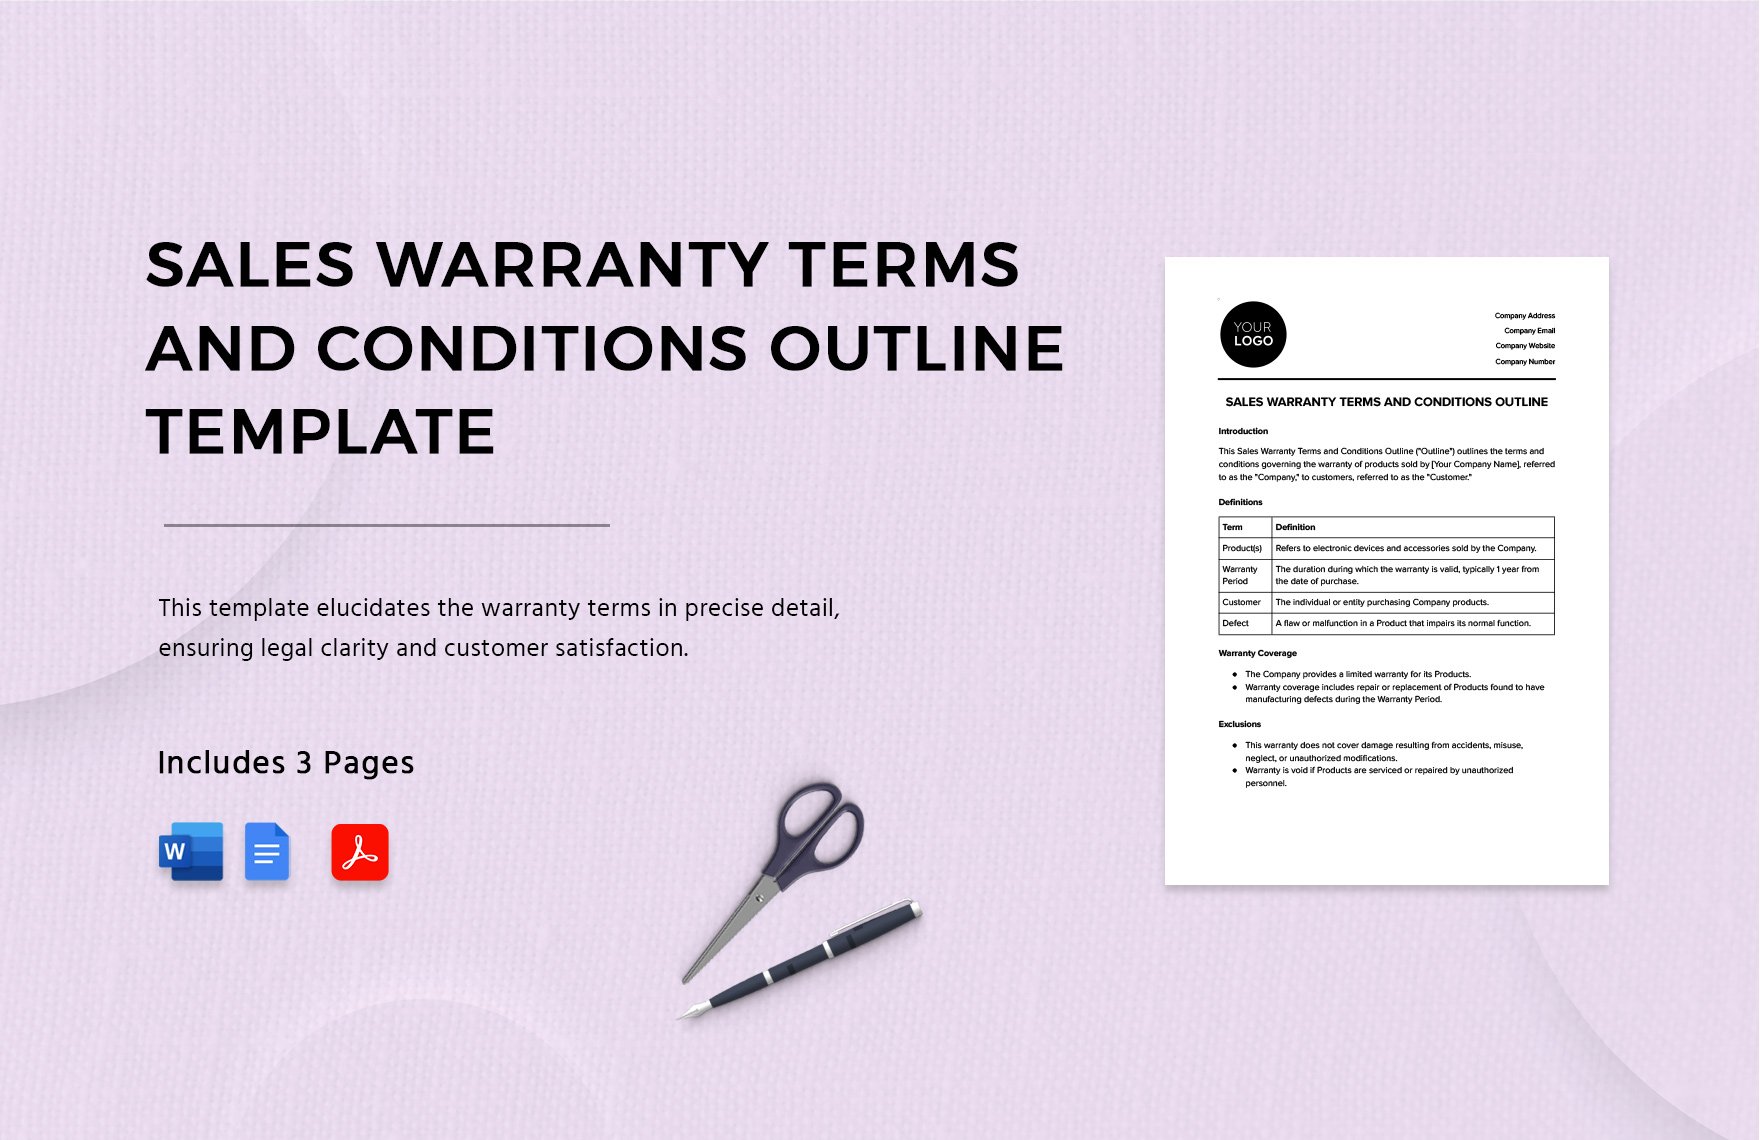 Sales Warranty Terms and Conditions Outline Template